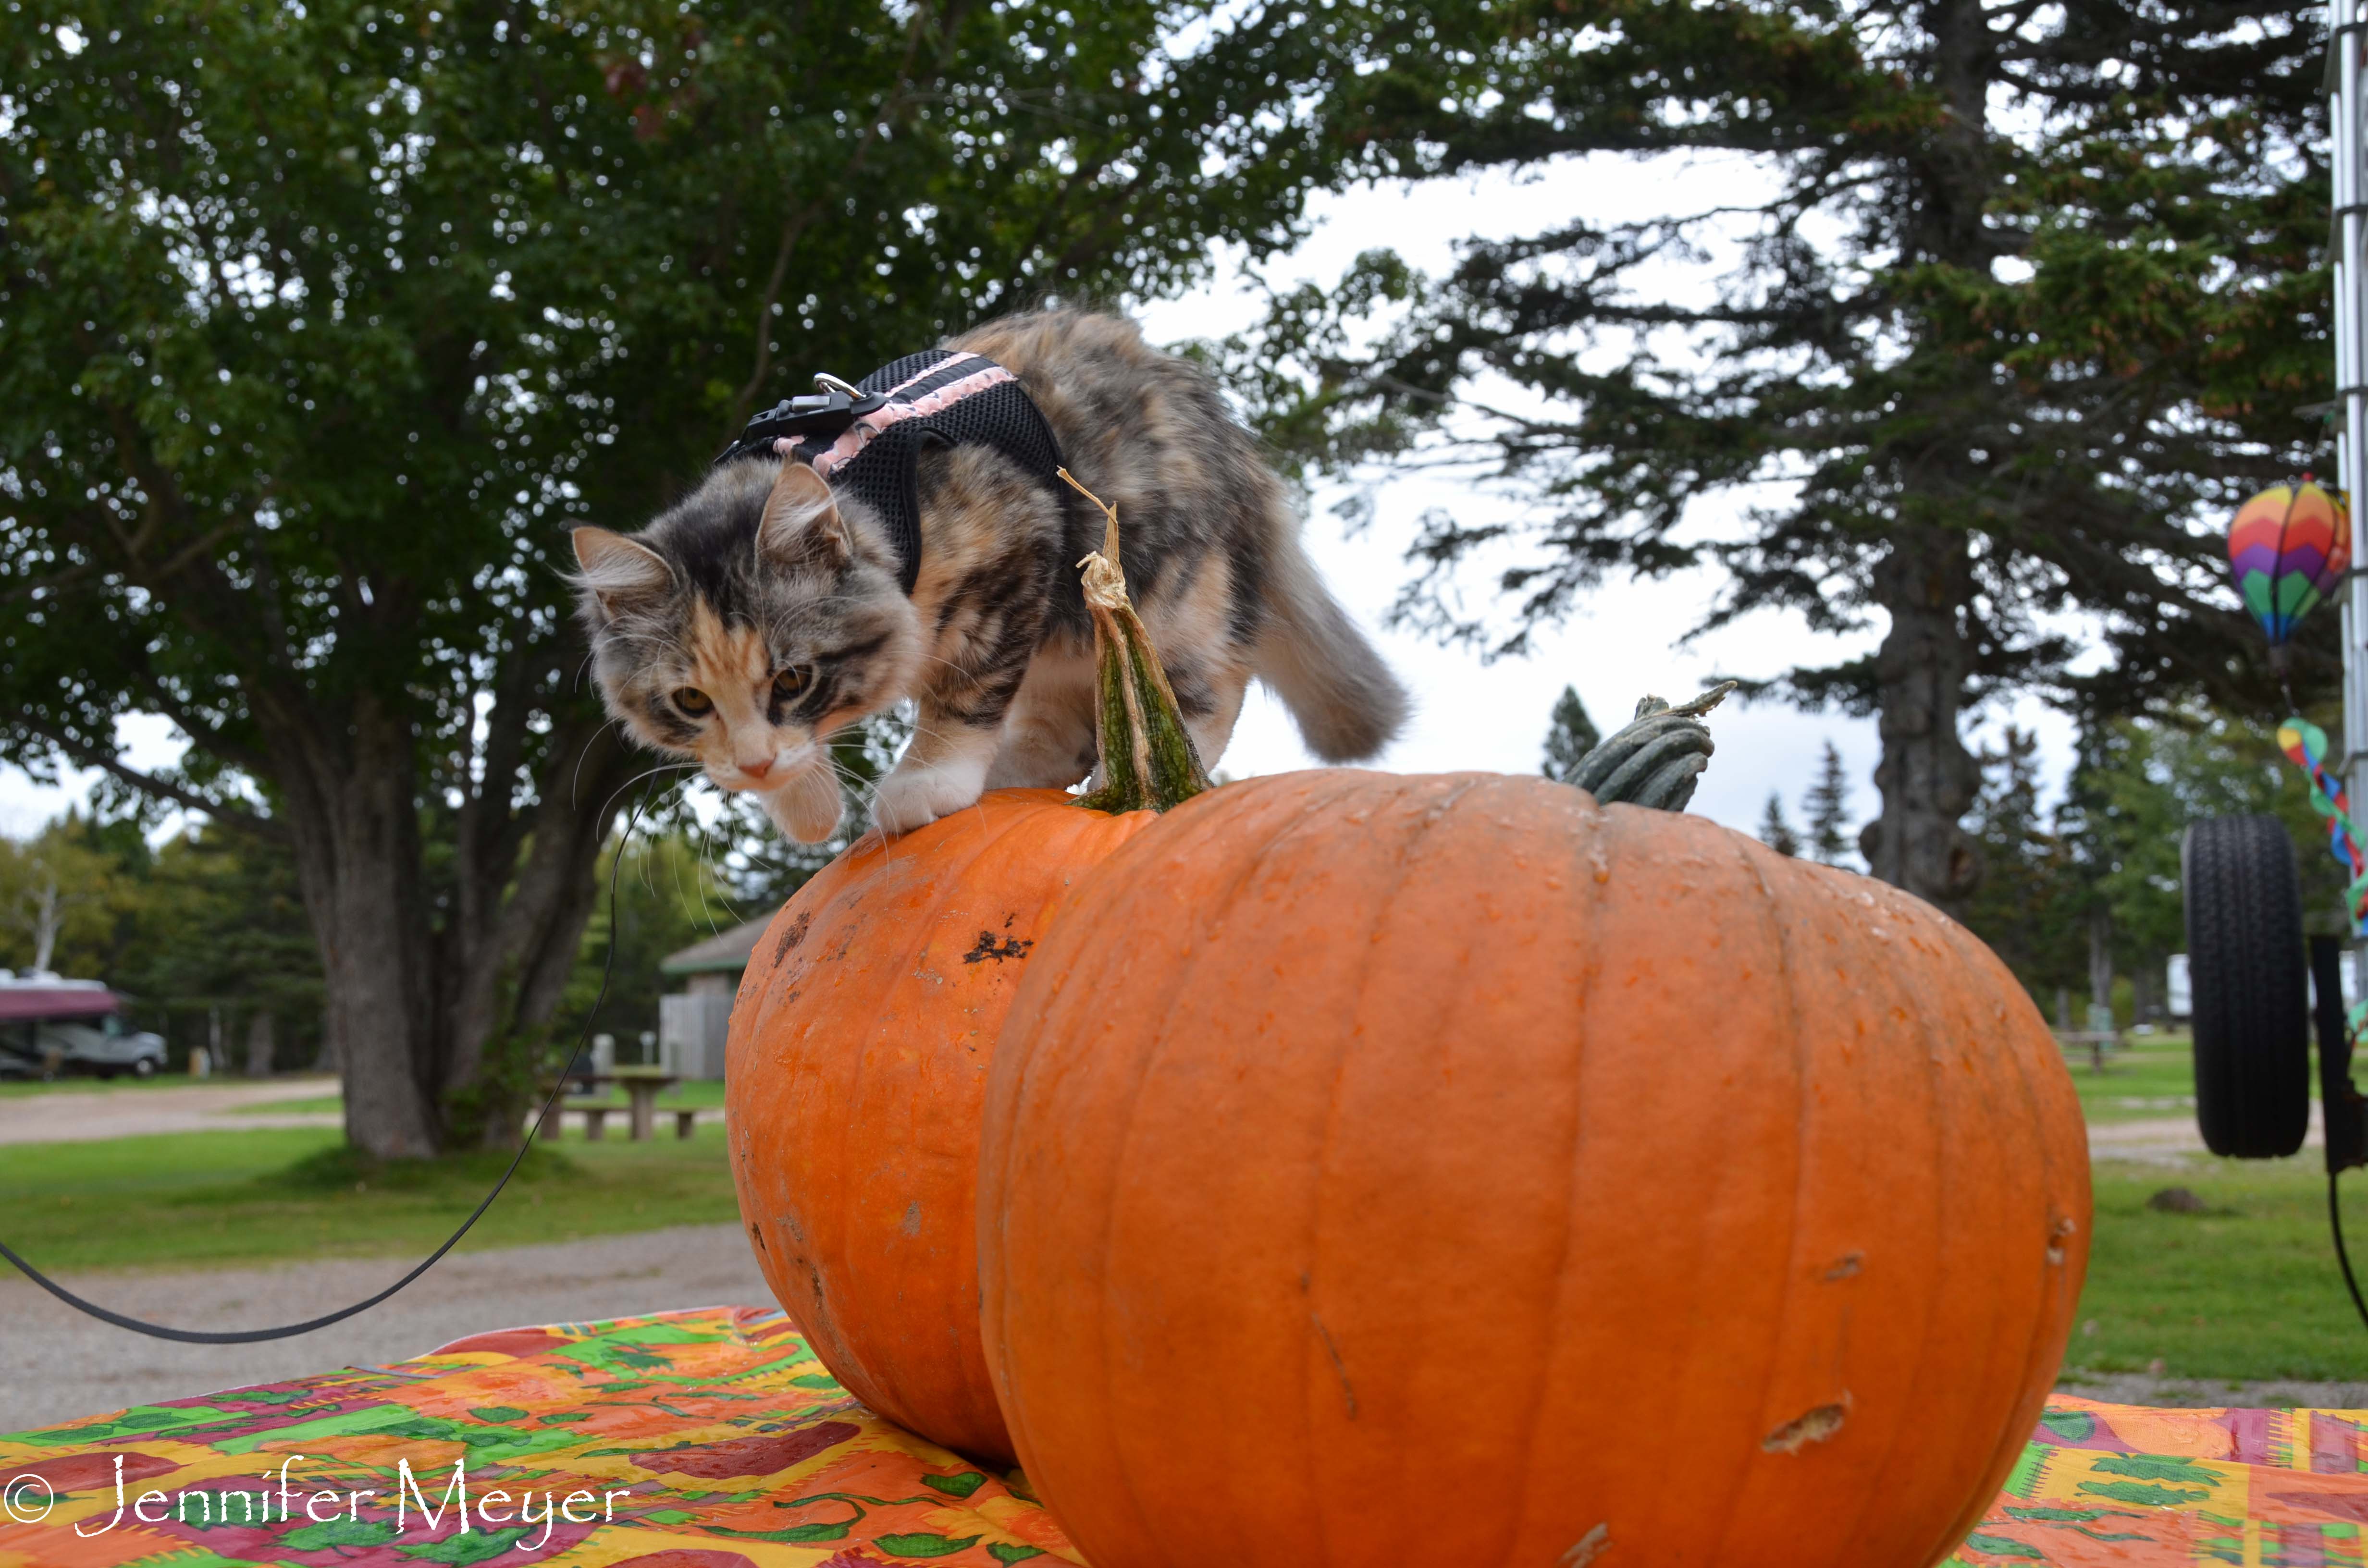 Checking out the pumpkins.